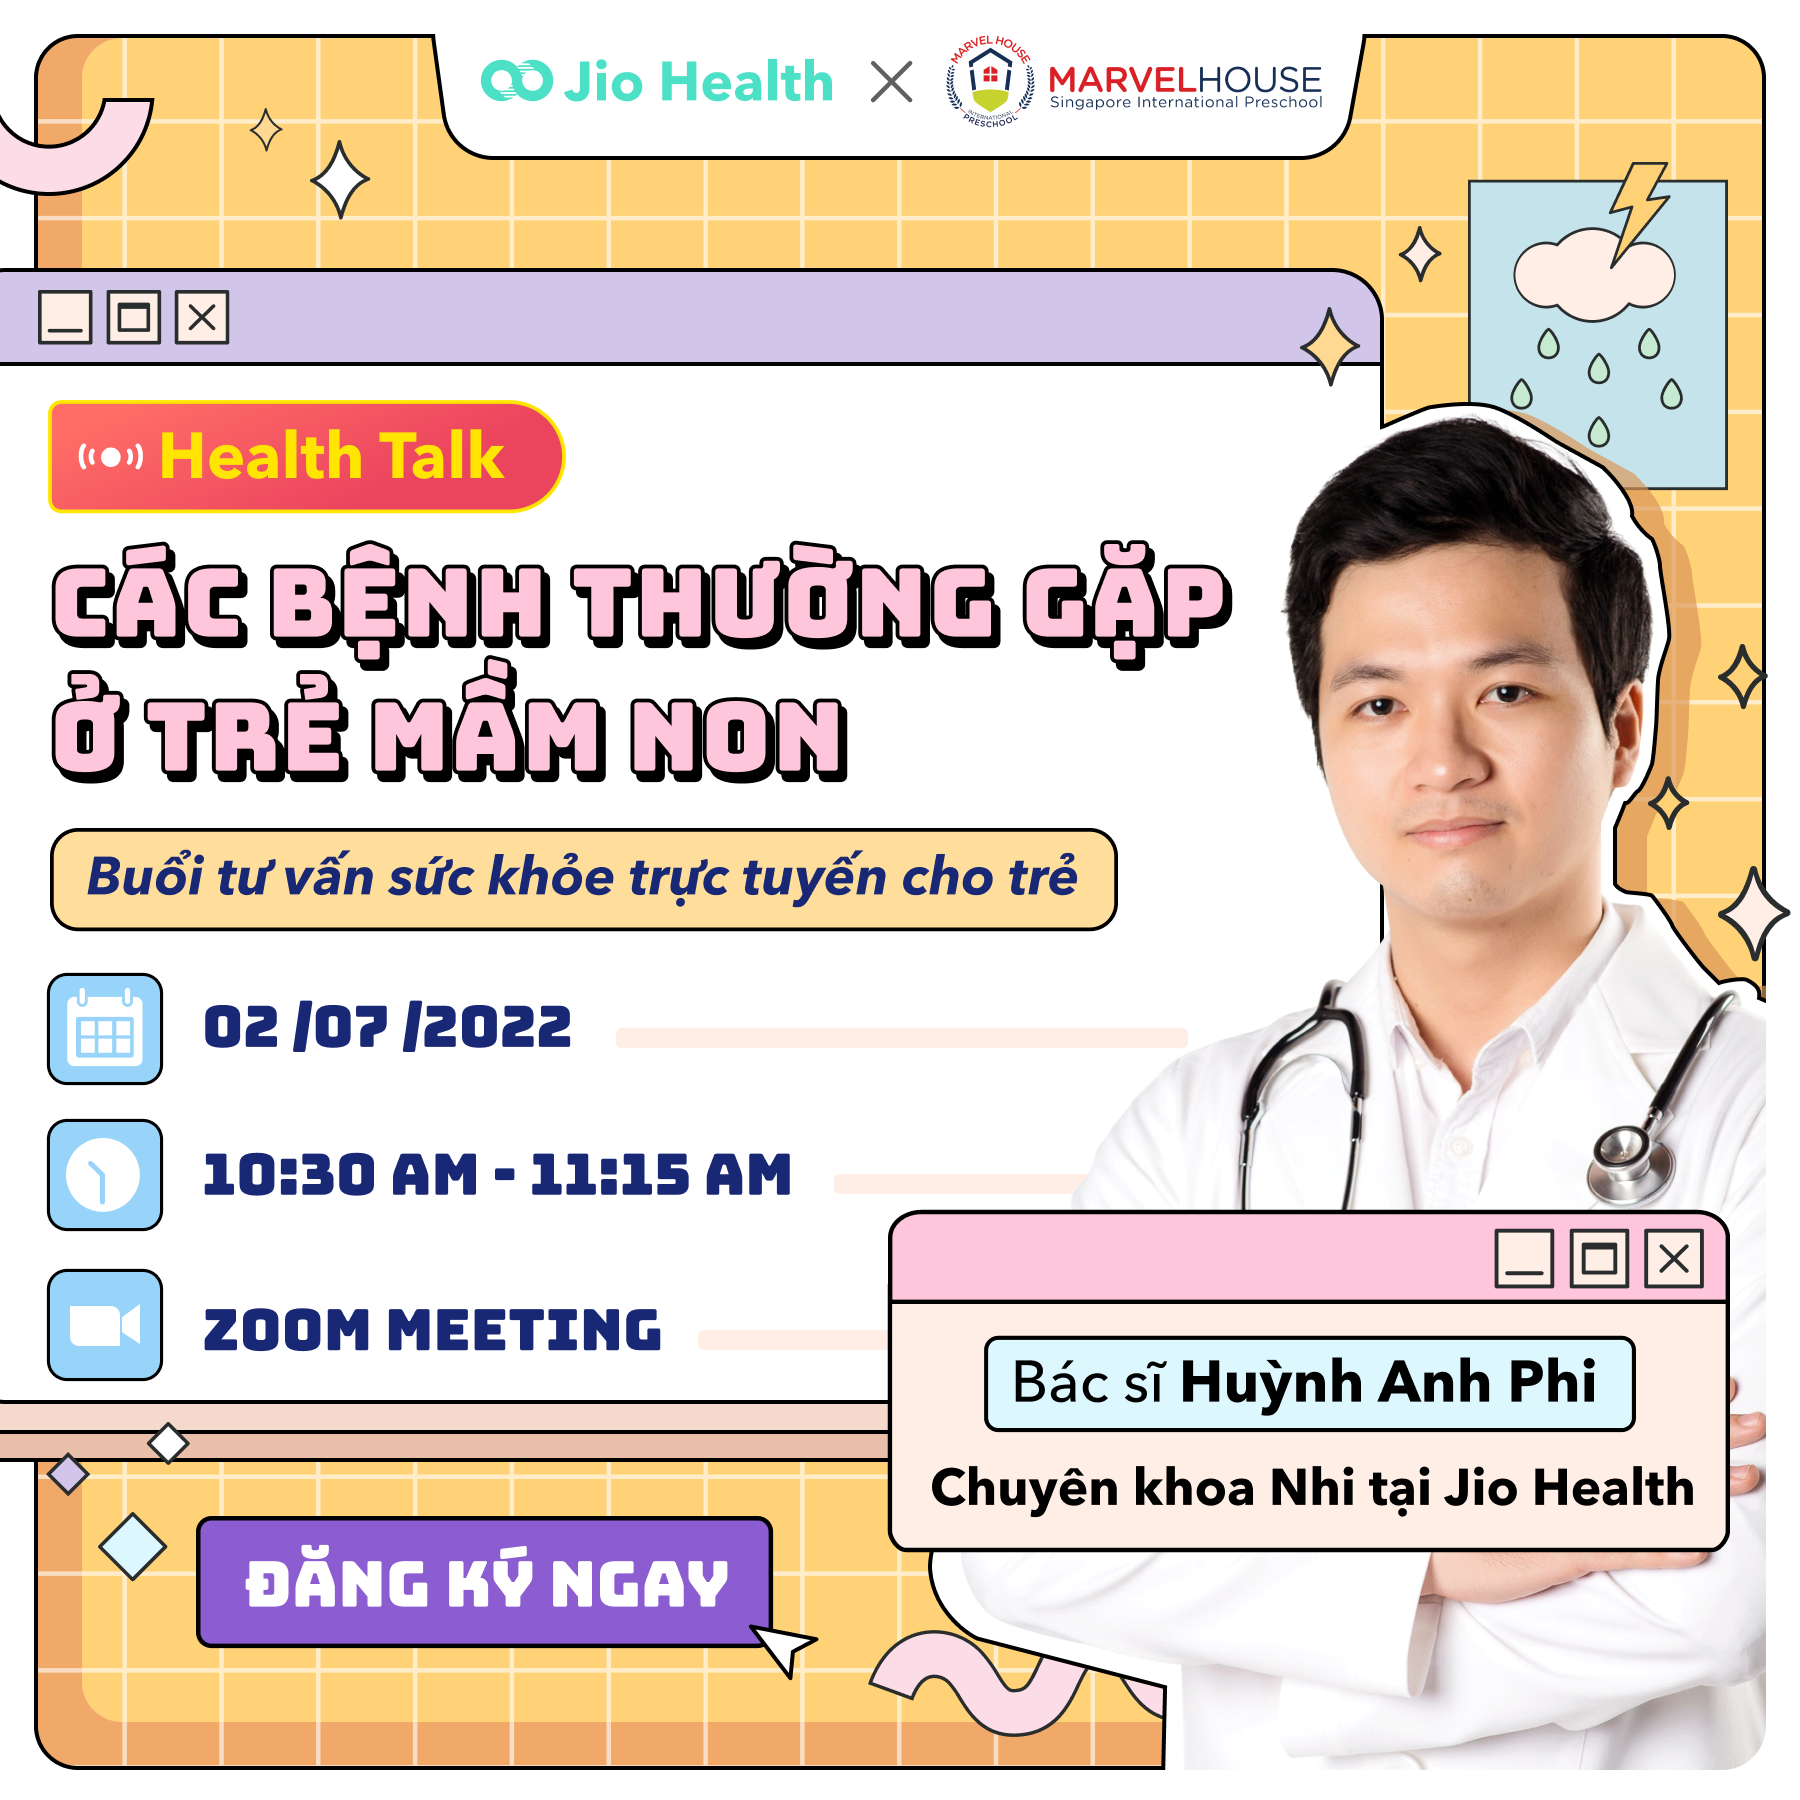 Rich results on Google's SERP when searching for "Healthtalk" "Zoom" "Health" "bệnh" "tre benh khi di hoc"